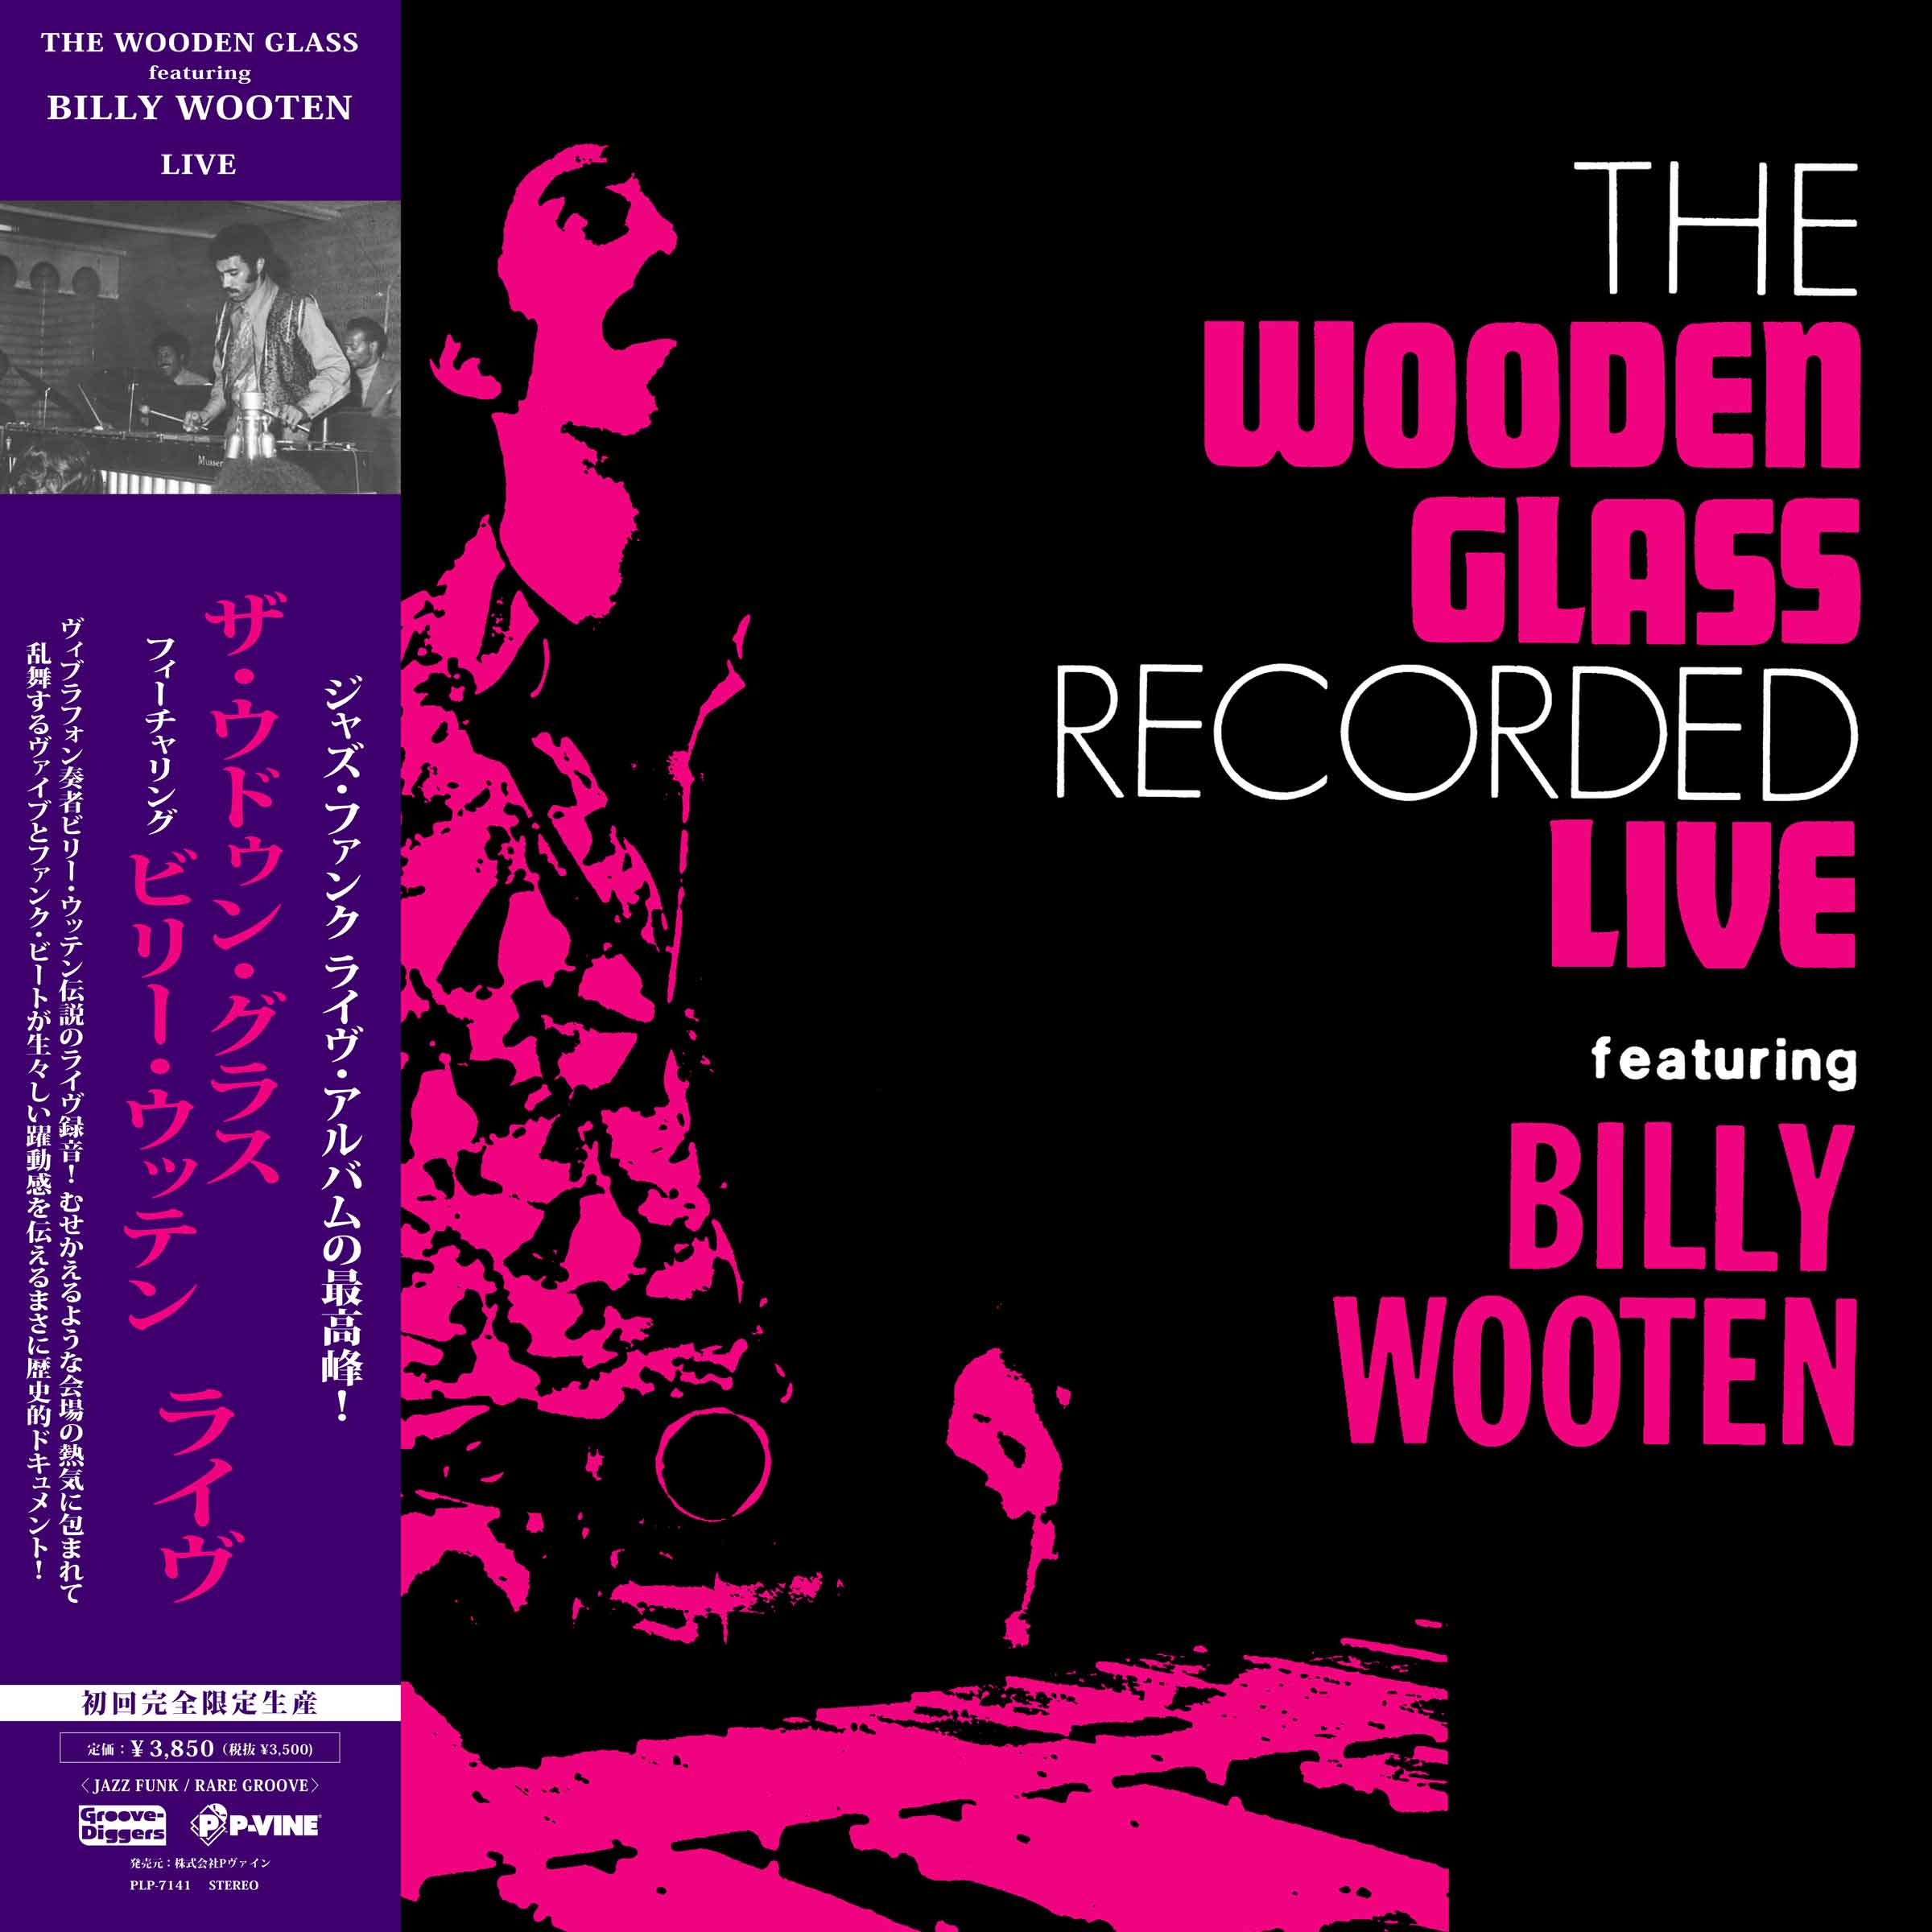 THE WOODEN GLASS featuring BILLY WOOTEN